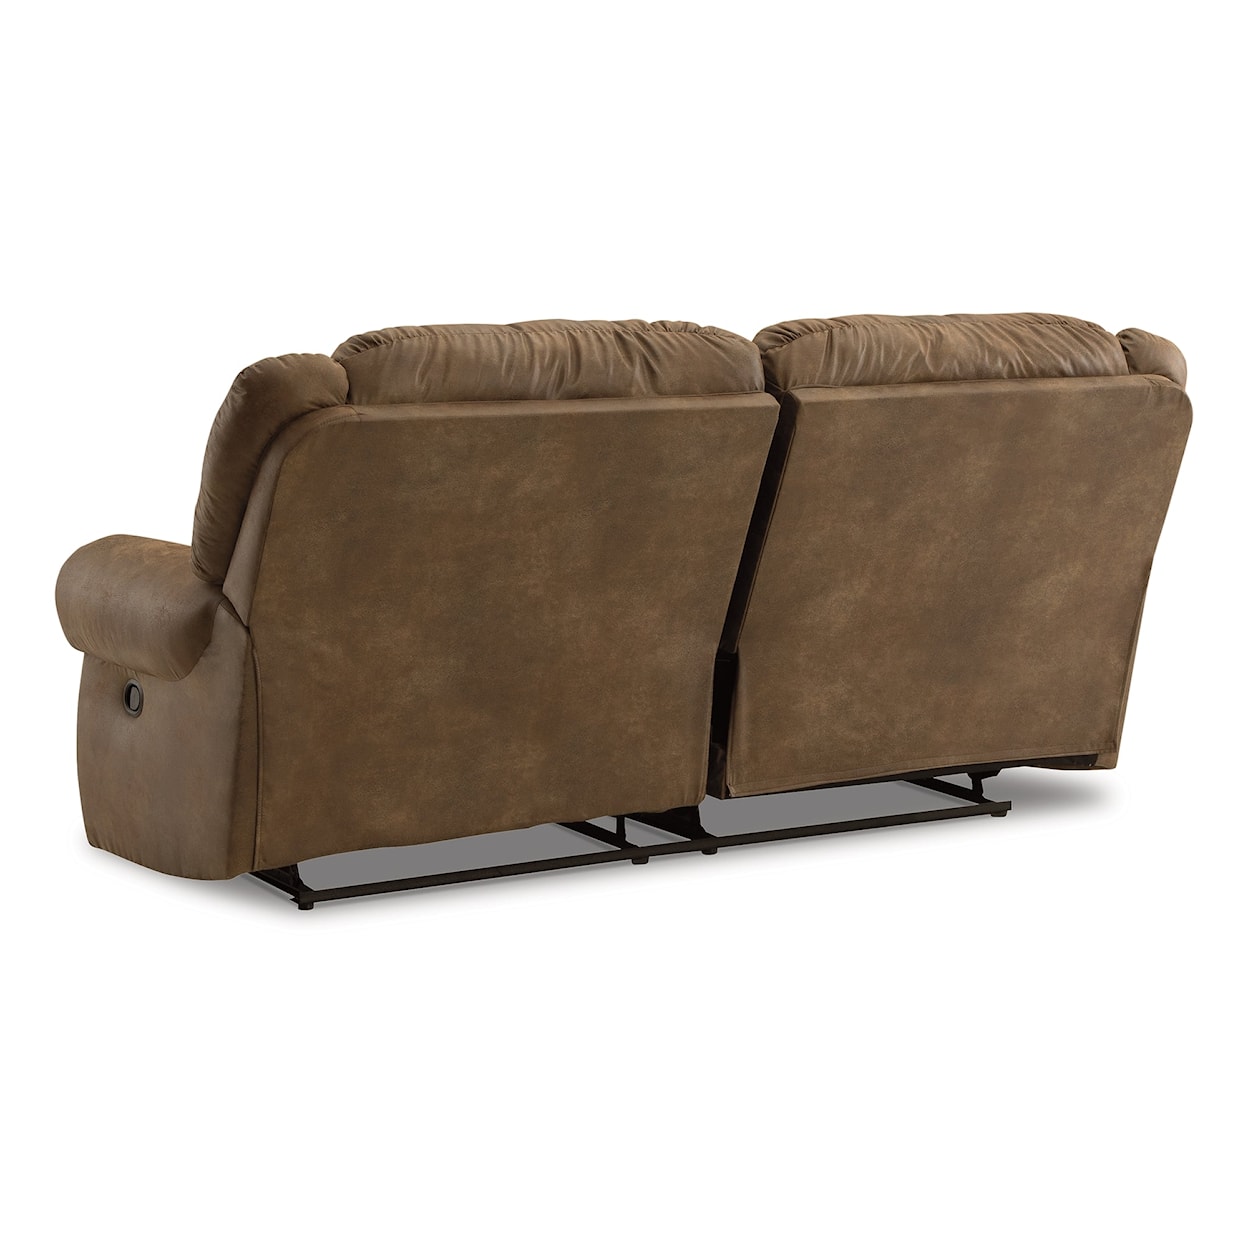 Signature Design by Ashley Boothbay 2 Seat Reclining Sofa